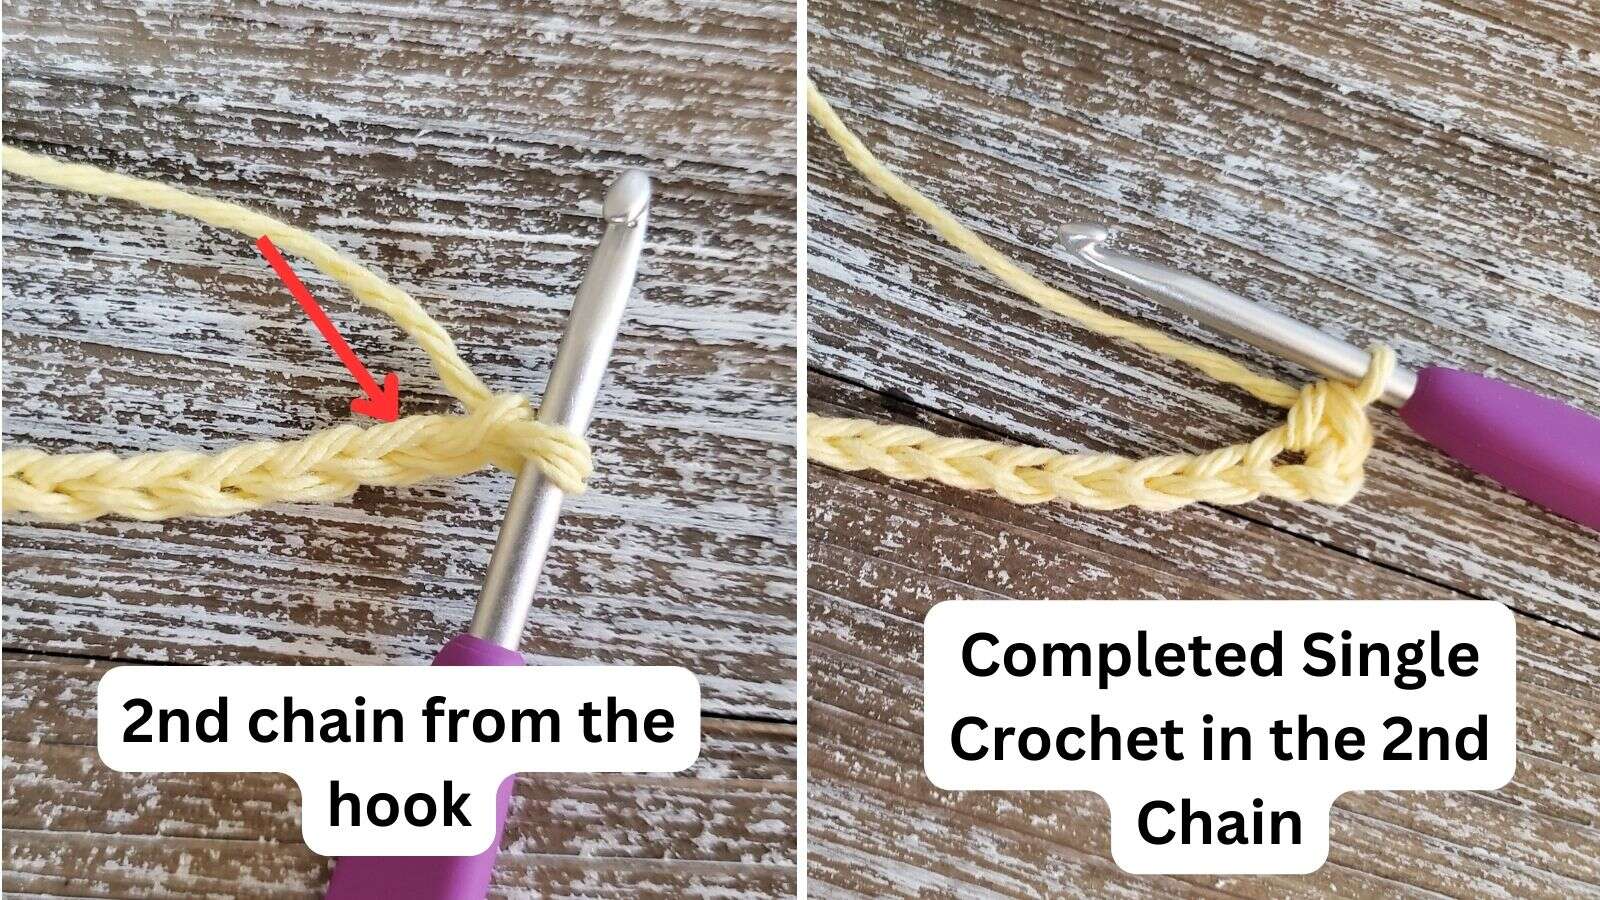 Lemon Peel Stitch, a single crochet starting in the 2nd chain from the hook